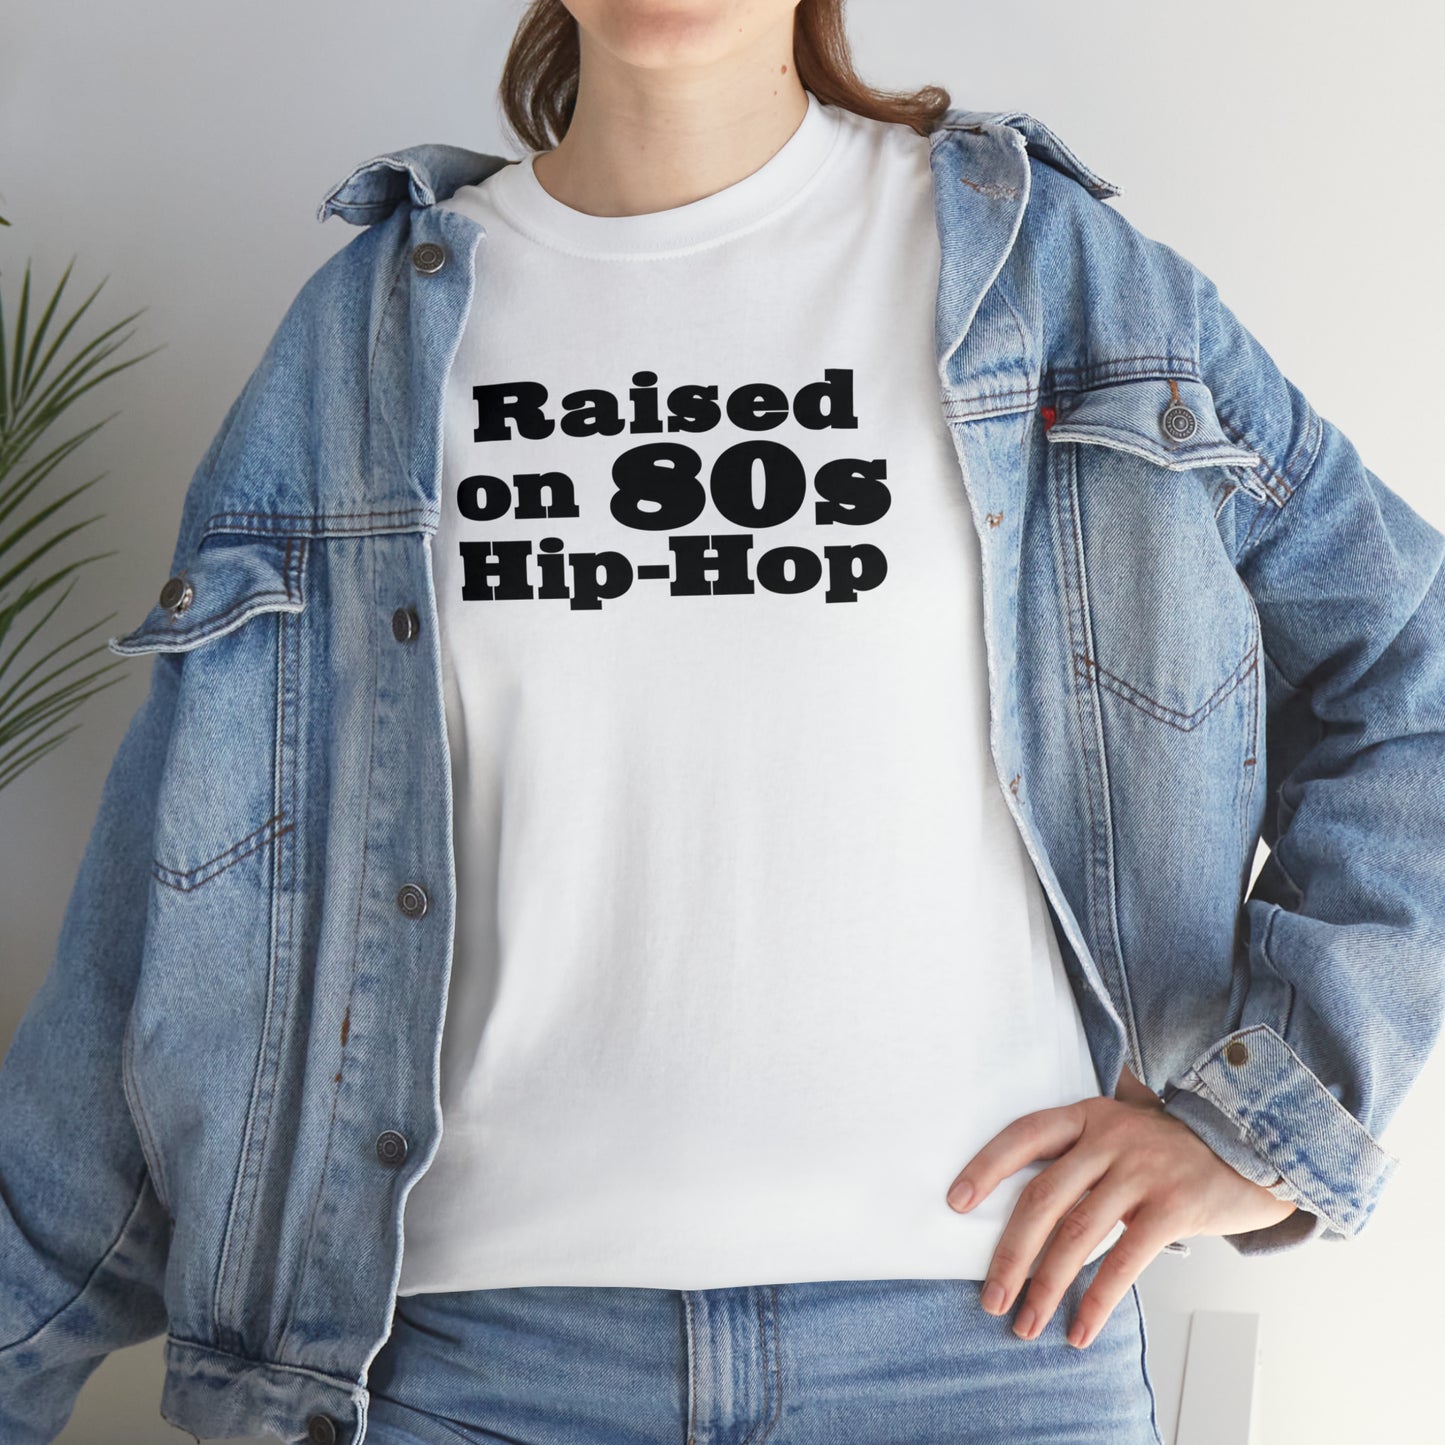 Raised on 80s Hip-Hop Shirt Great gift for an 80s Hip-Hop & Rap Lover T-Shirt